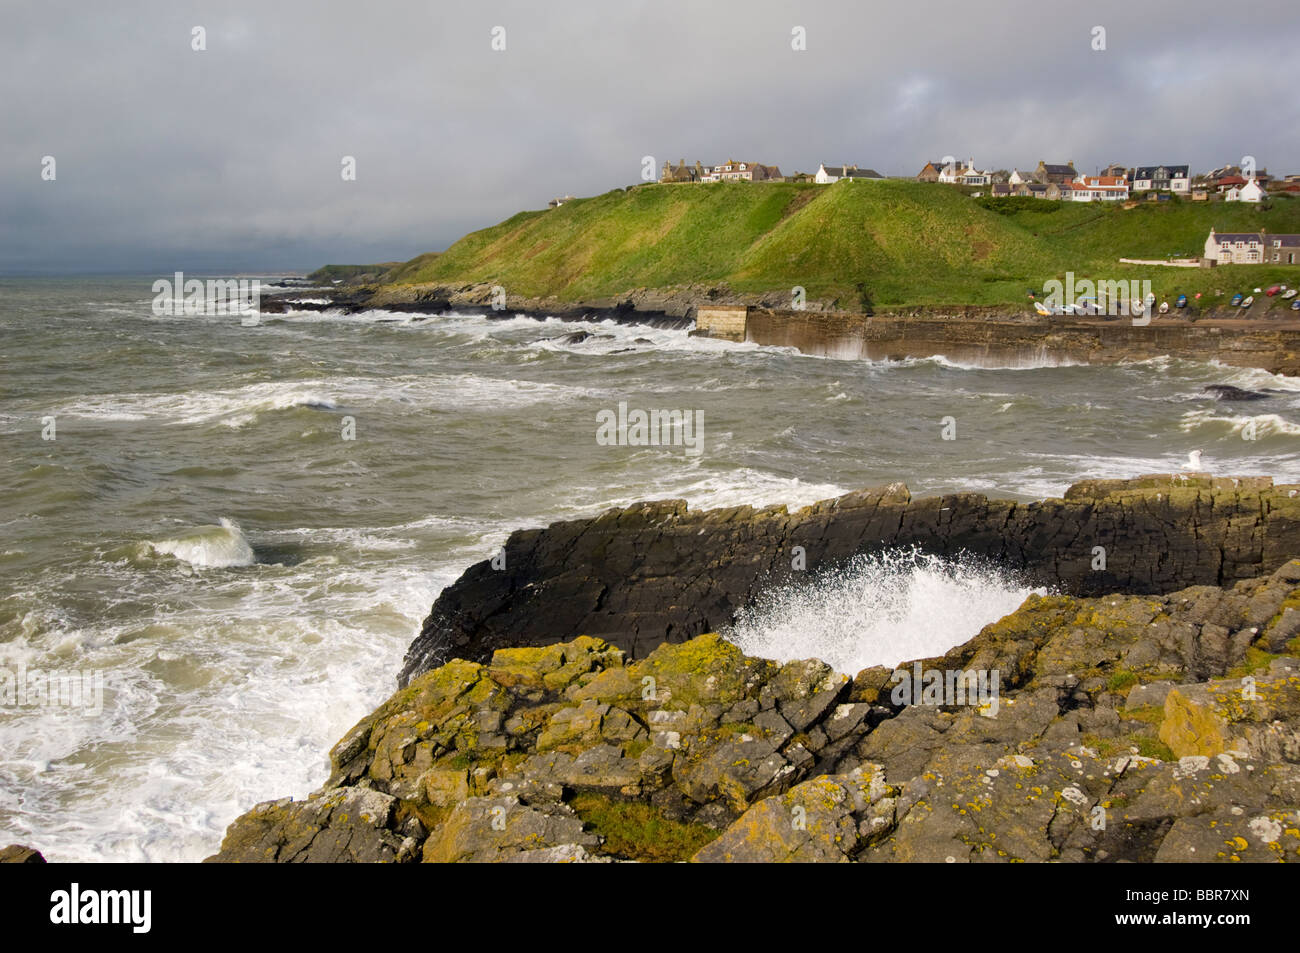 Stormy waves at the traditional fishing village and harbour of Collieston, Scotland. The rocks are of granite. Stock Photo